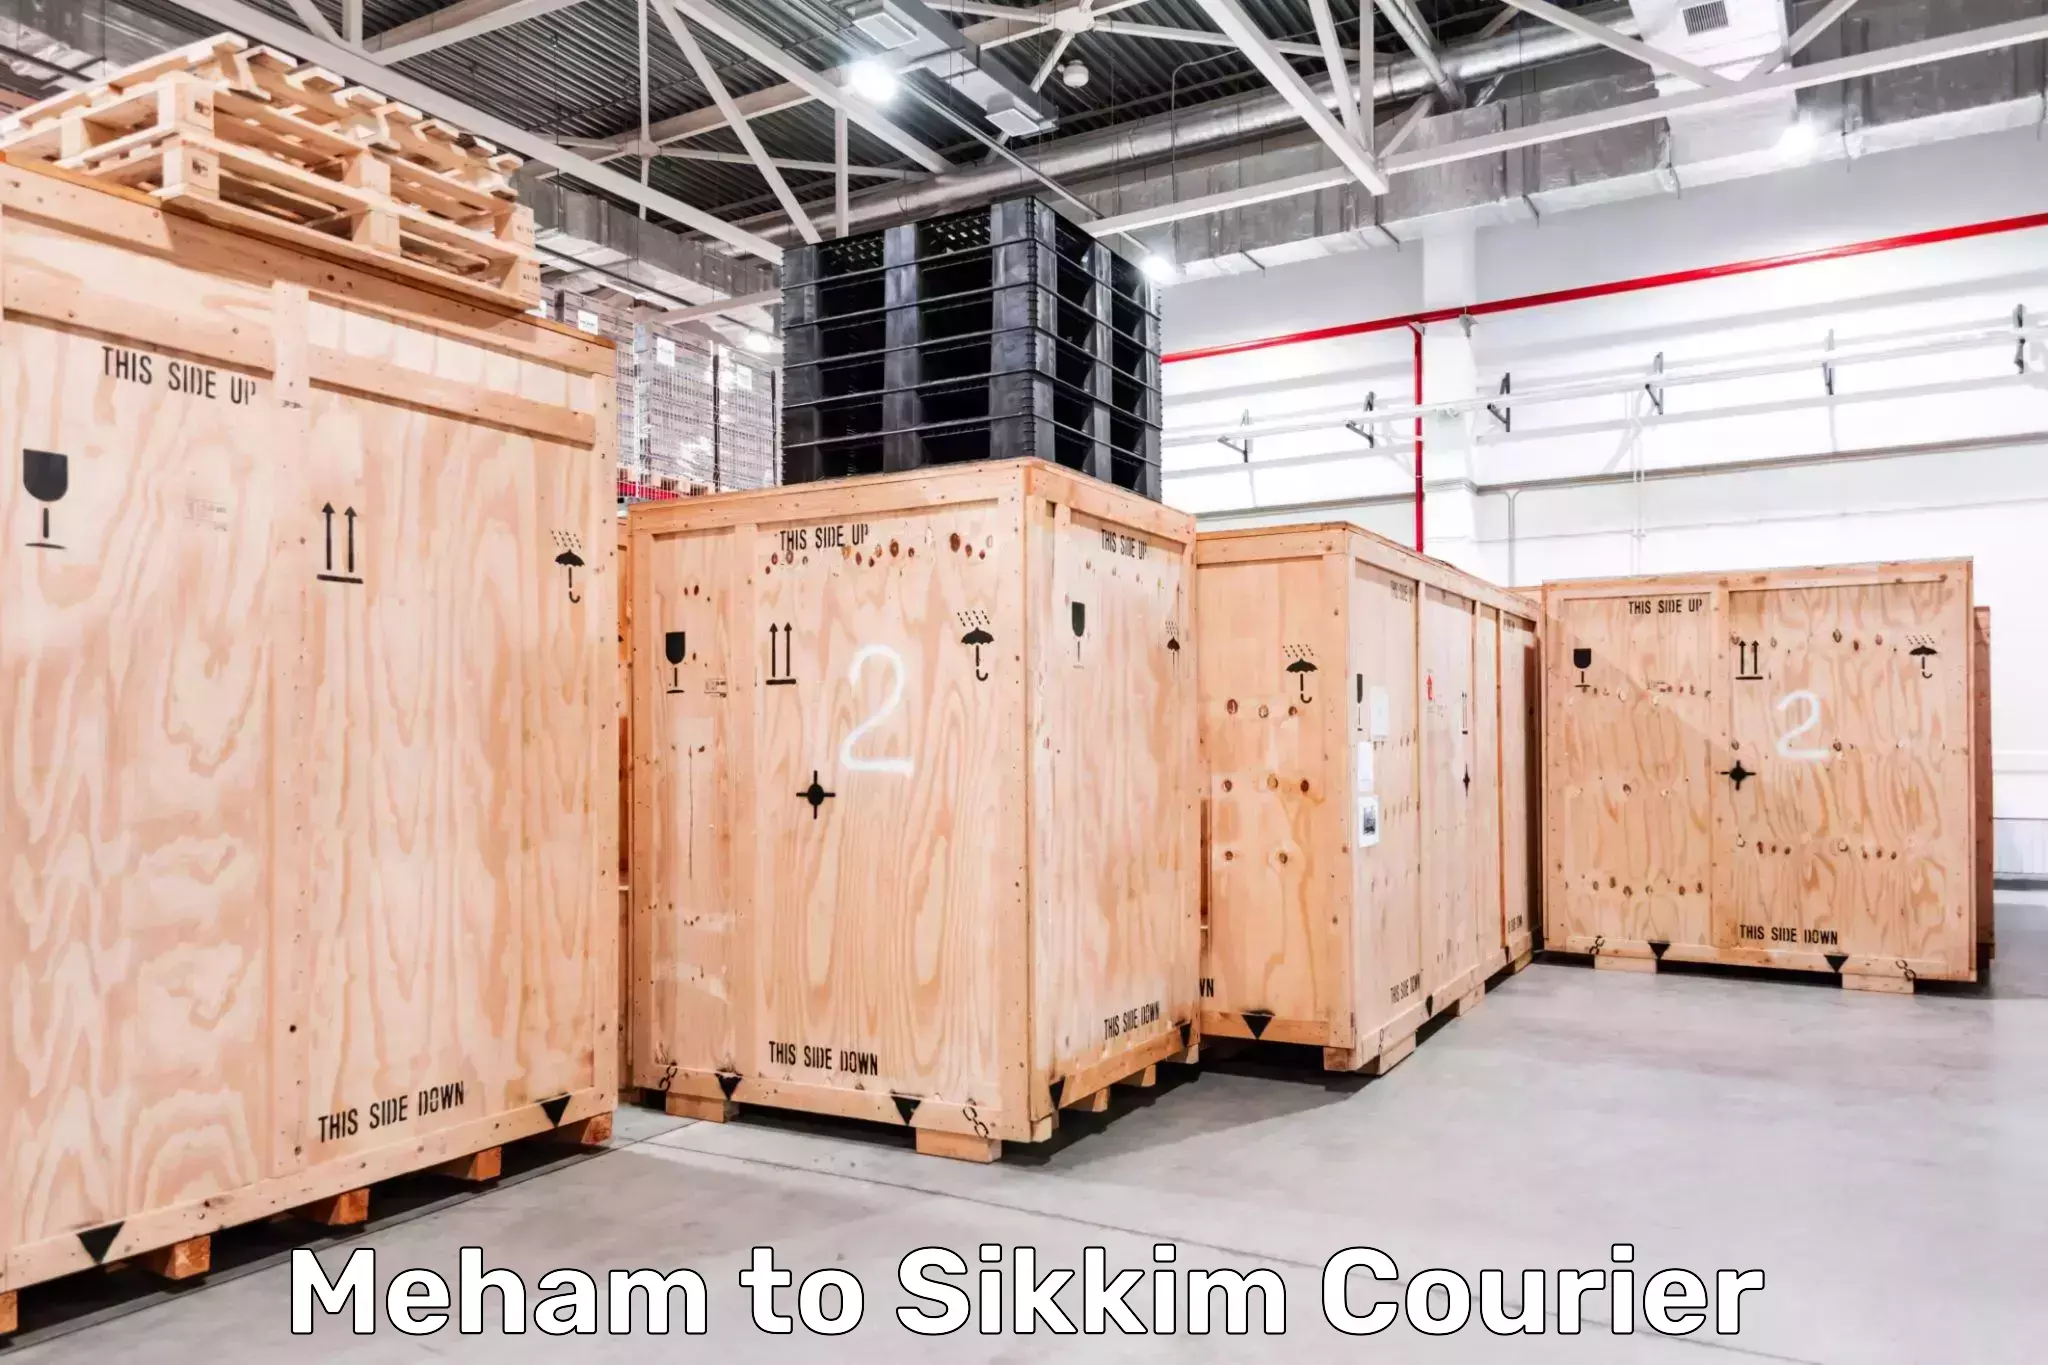 Customer-centric shipping Meham to Sikkim